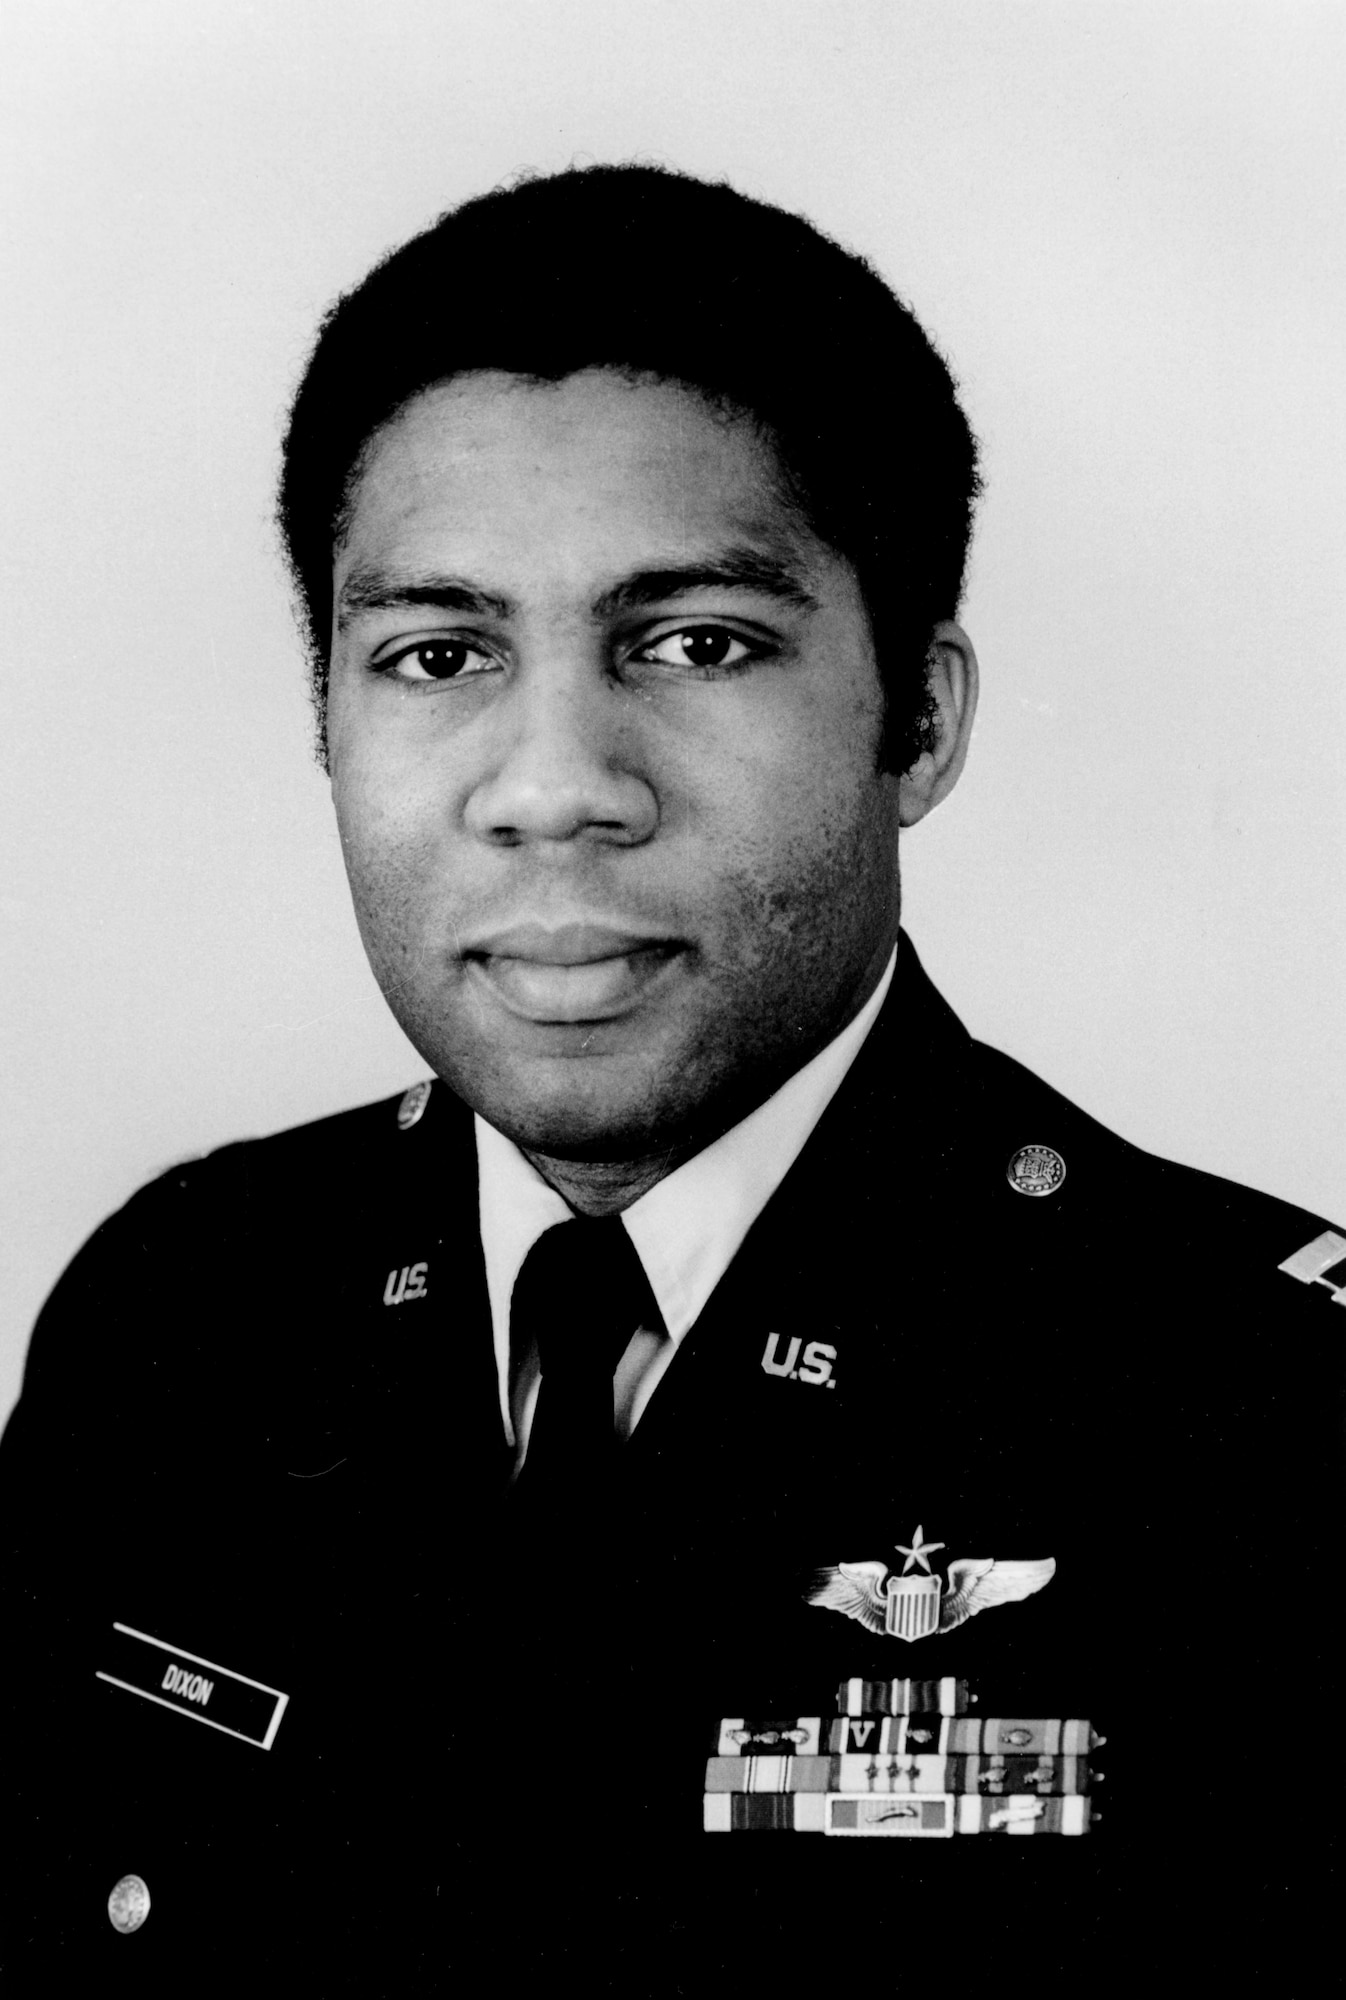 Maj. William S. Dixon, Jr. was born Dec. 25, 1946, in Detroit, Mich. Commissioned a 2nd Lt. in the Air Force in 1968, Maj. Dixon obtained a Master’s Degree in Political Science from Ball State University in Muncie, Ind.